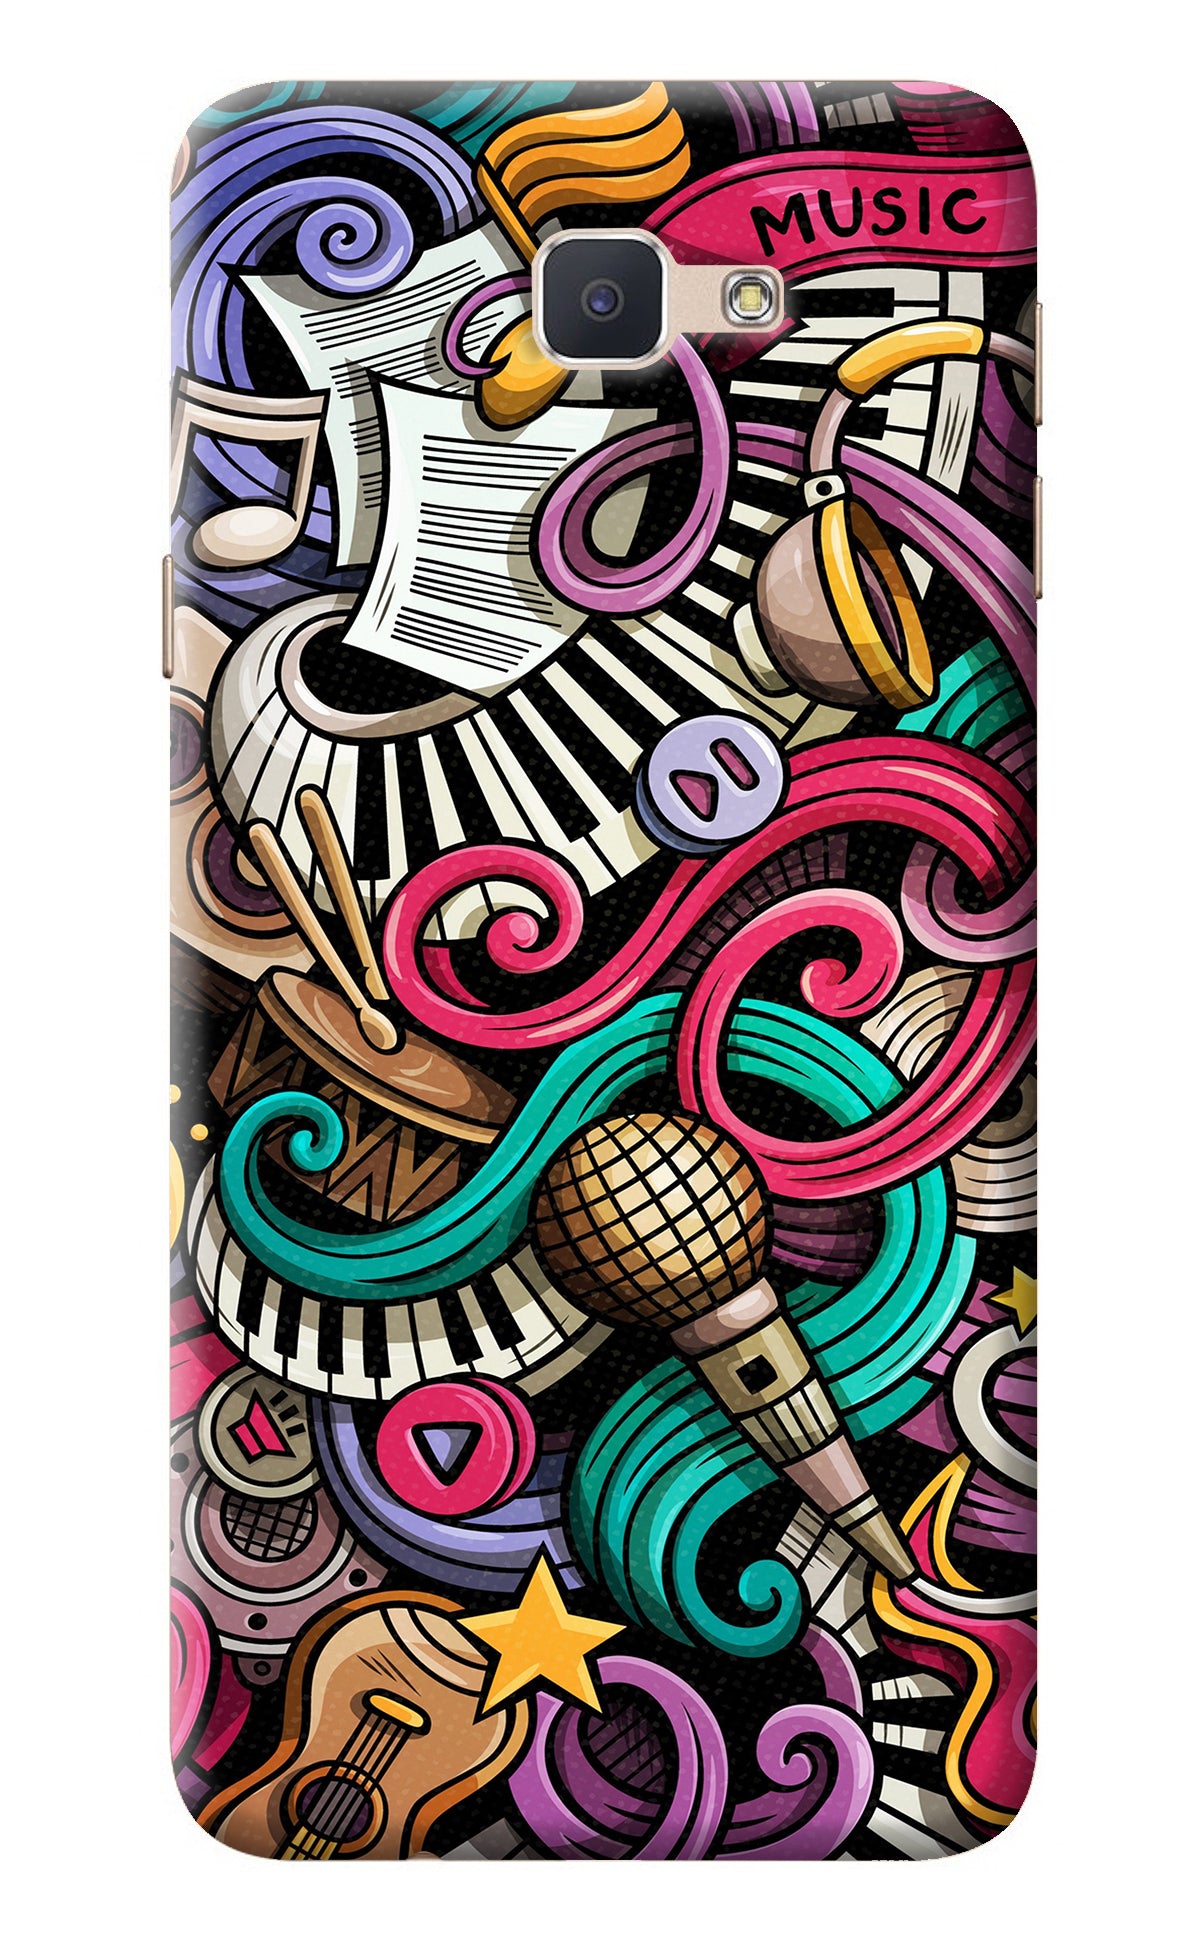 Music Abstract Samsung J7 Prime Back Cover